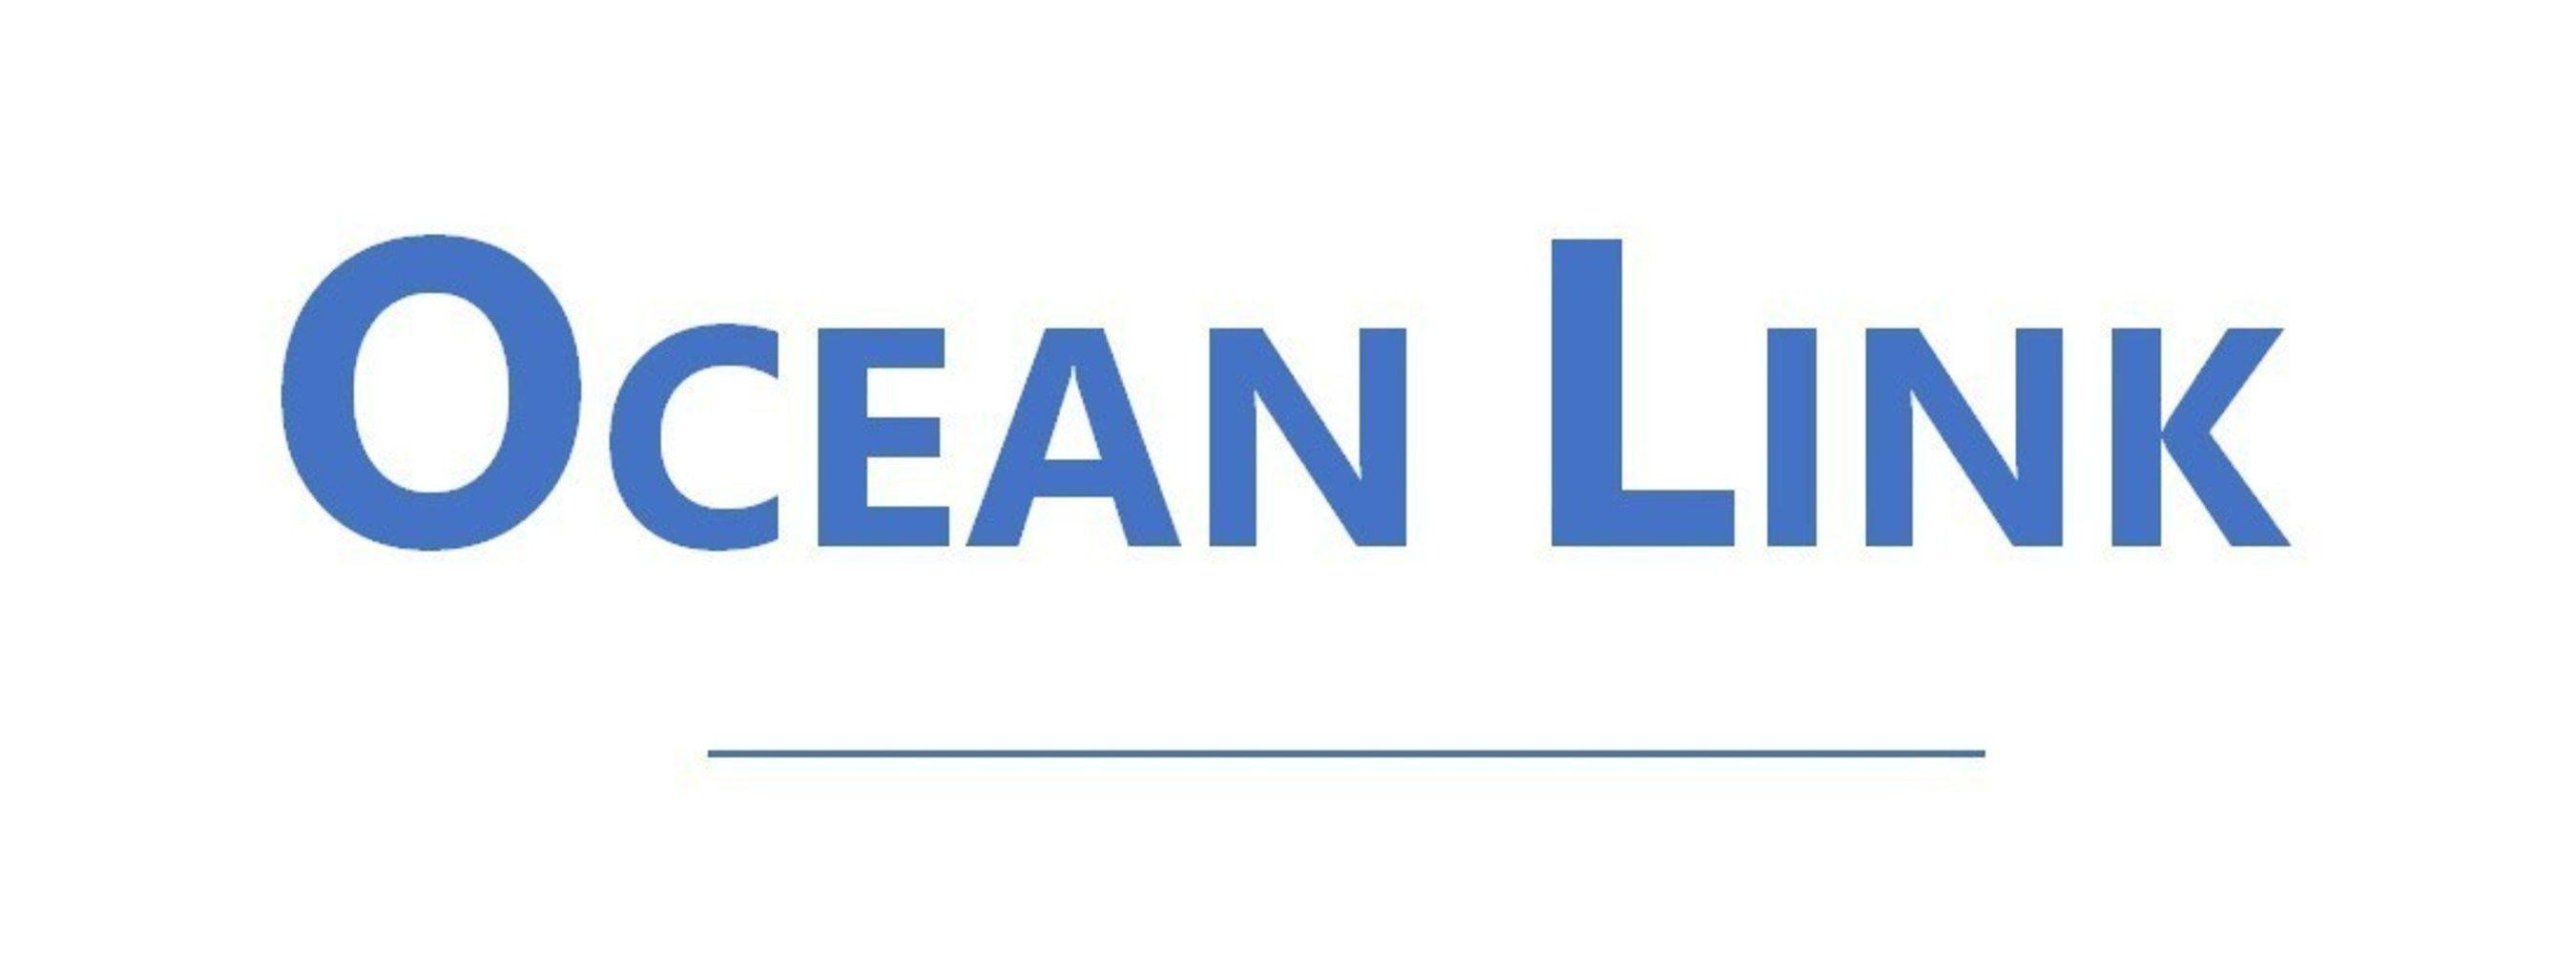 Ctrip Logo - Ocean Link, the First Private Equity Firm Focused on China's Travel